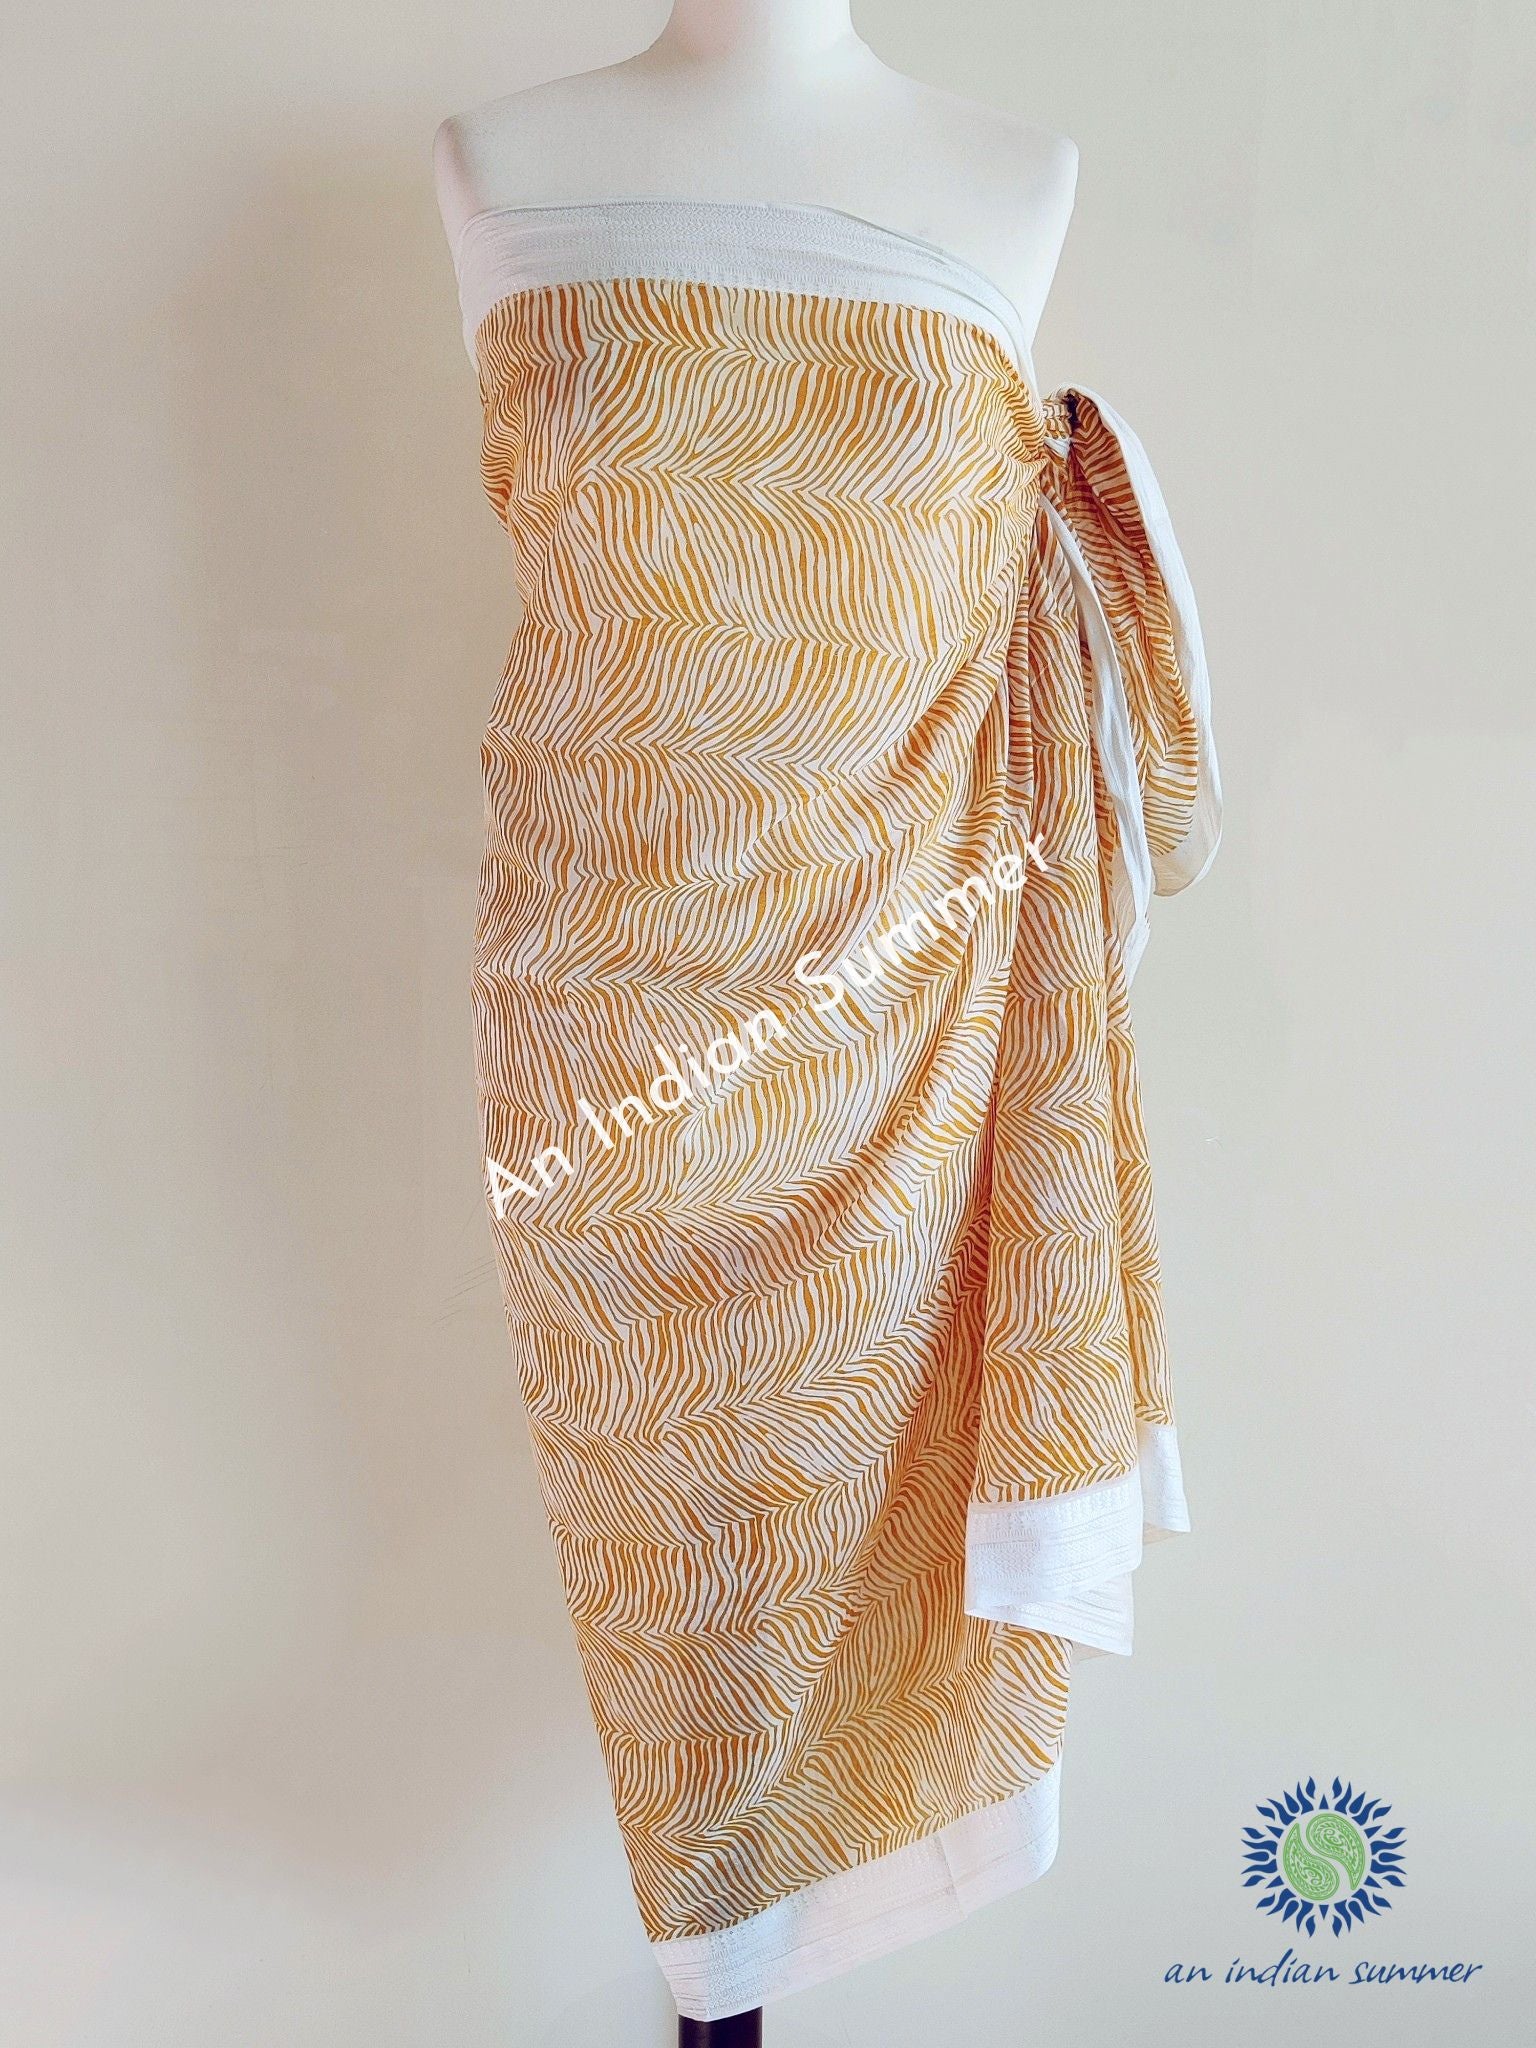 Savannah Woven Border Sarong Pareo | Mustard Yellow | Hand Block Printed | Soft Cotton Voile | An Indian Summer | Seasonless Timeless Sustainable Ethical Authentic Artisan Conscious Clothing Lifestyle Brand